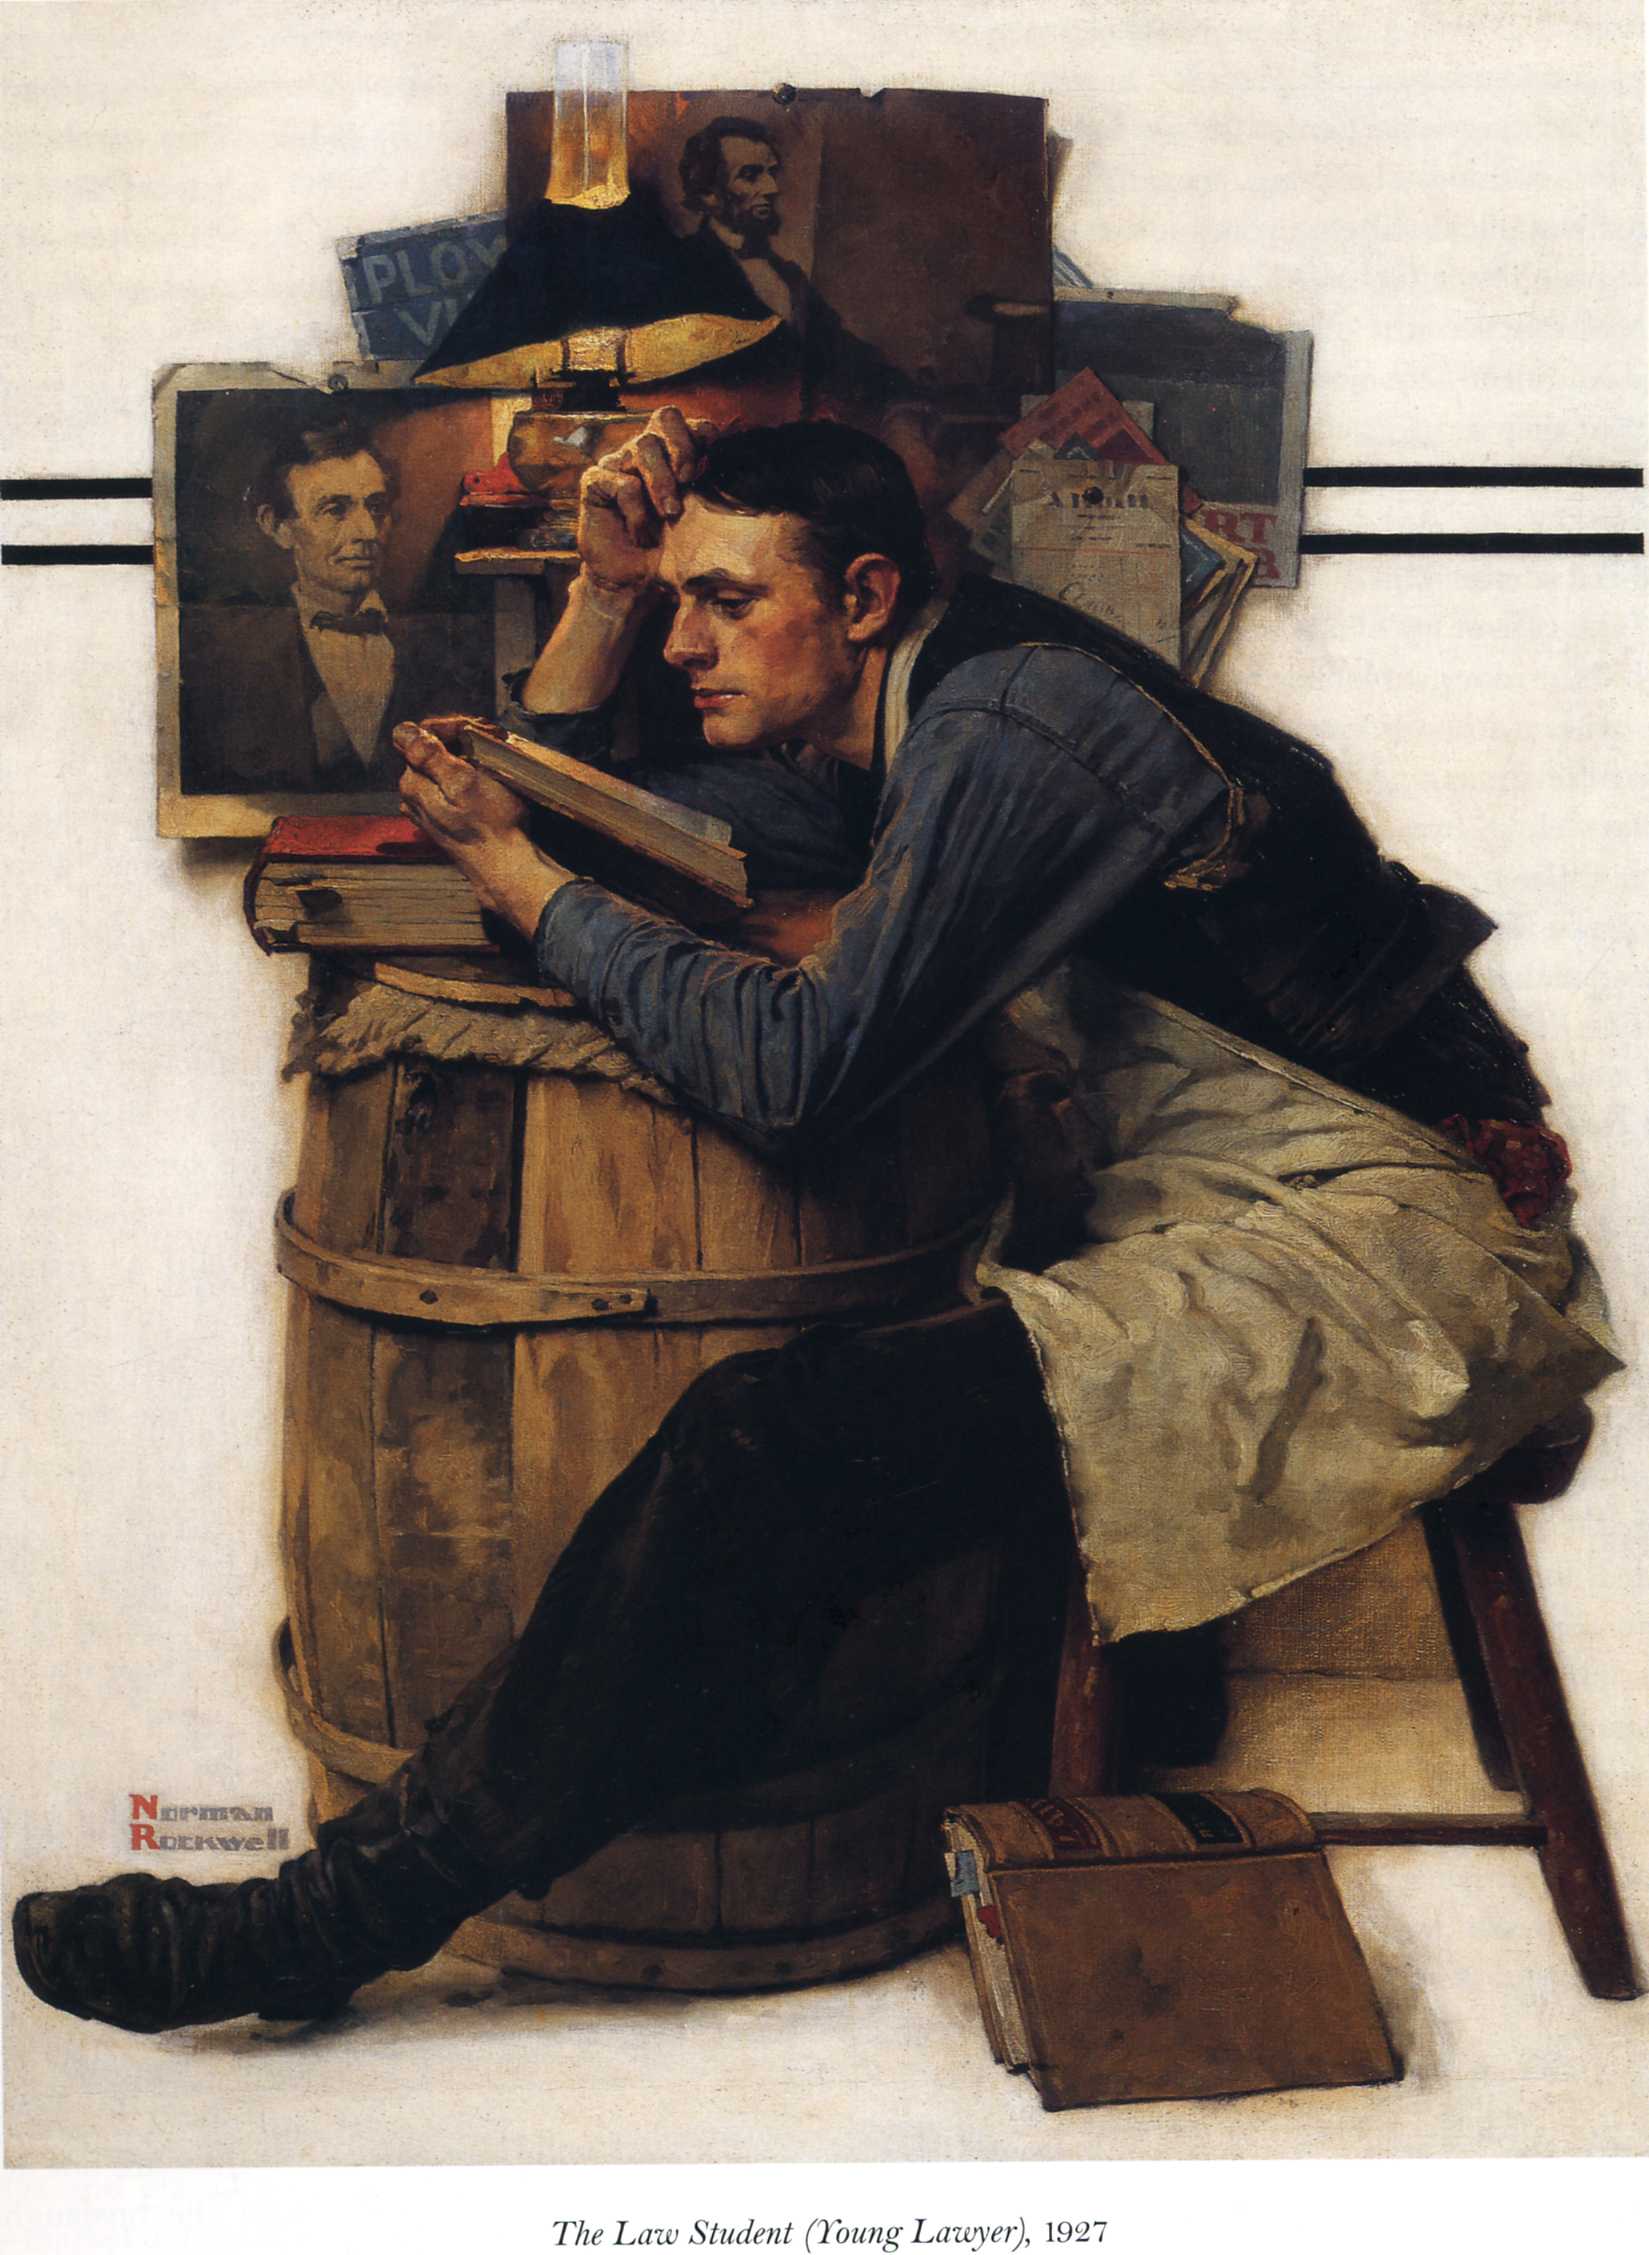 Young Lawyer, 1927 - Norman Rockwell - WikiArt.org